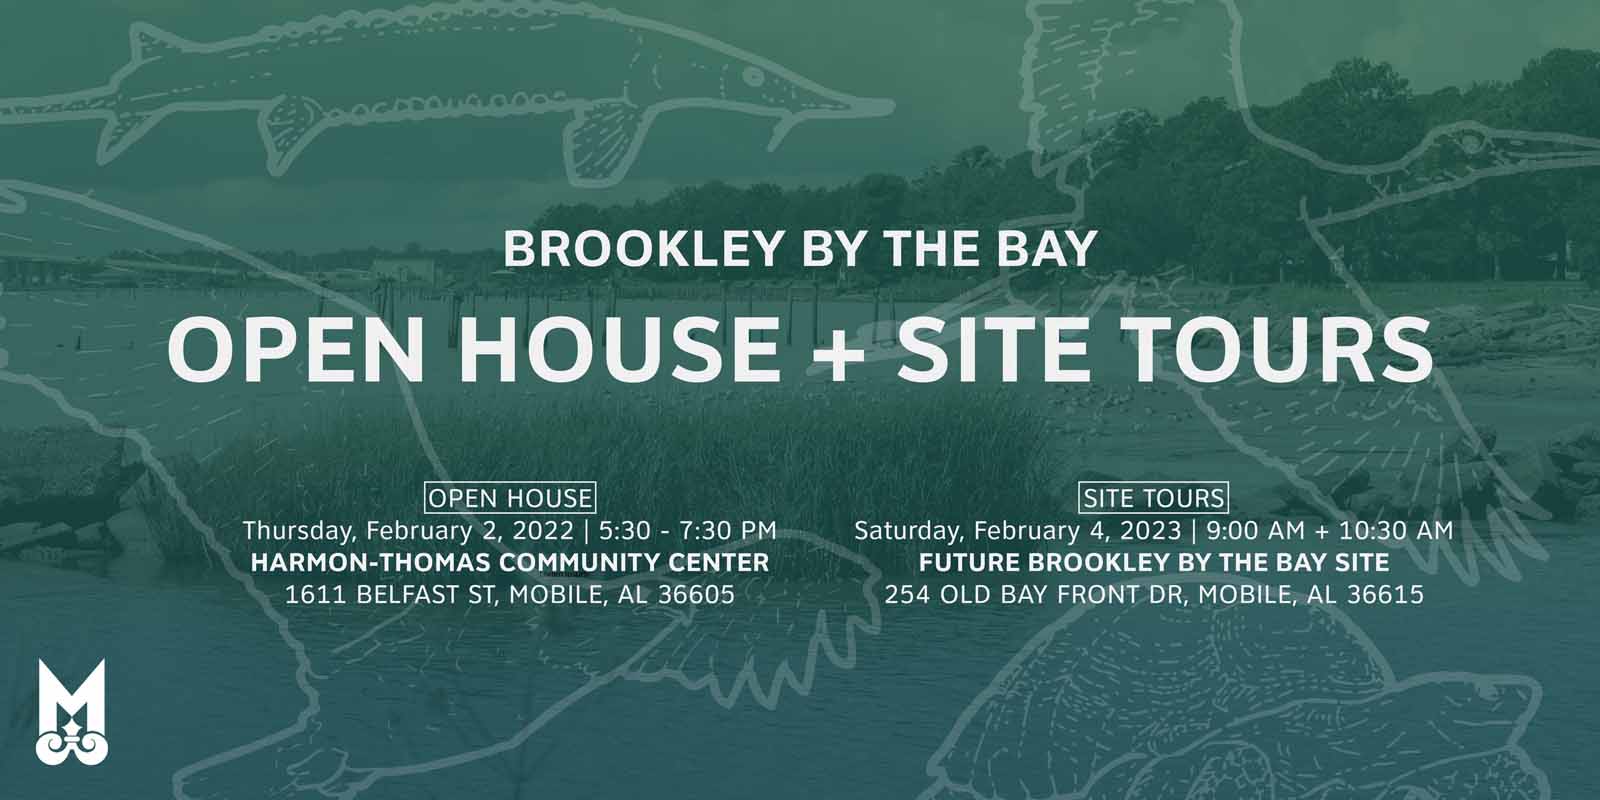 Brookley By The Bay Events Coming Up